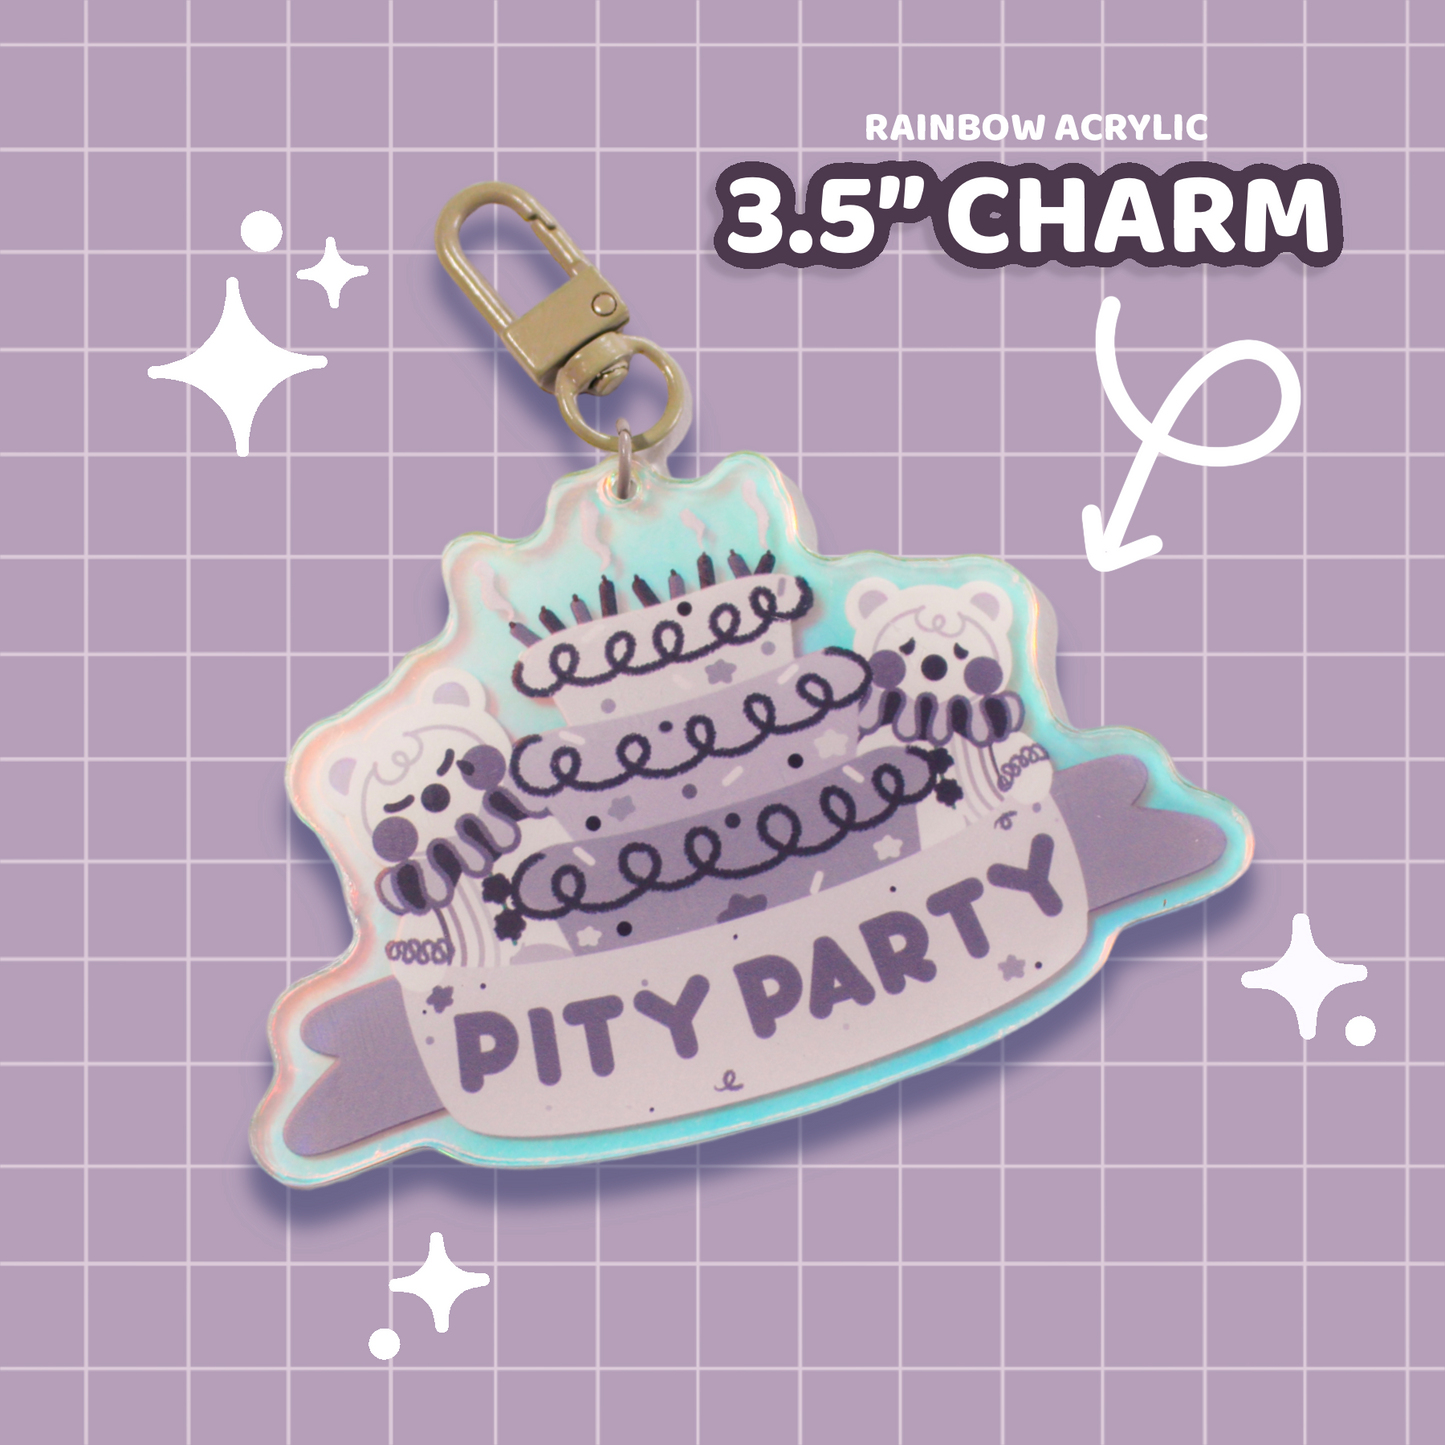 Pity Party Charm